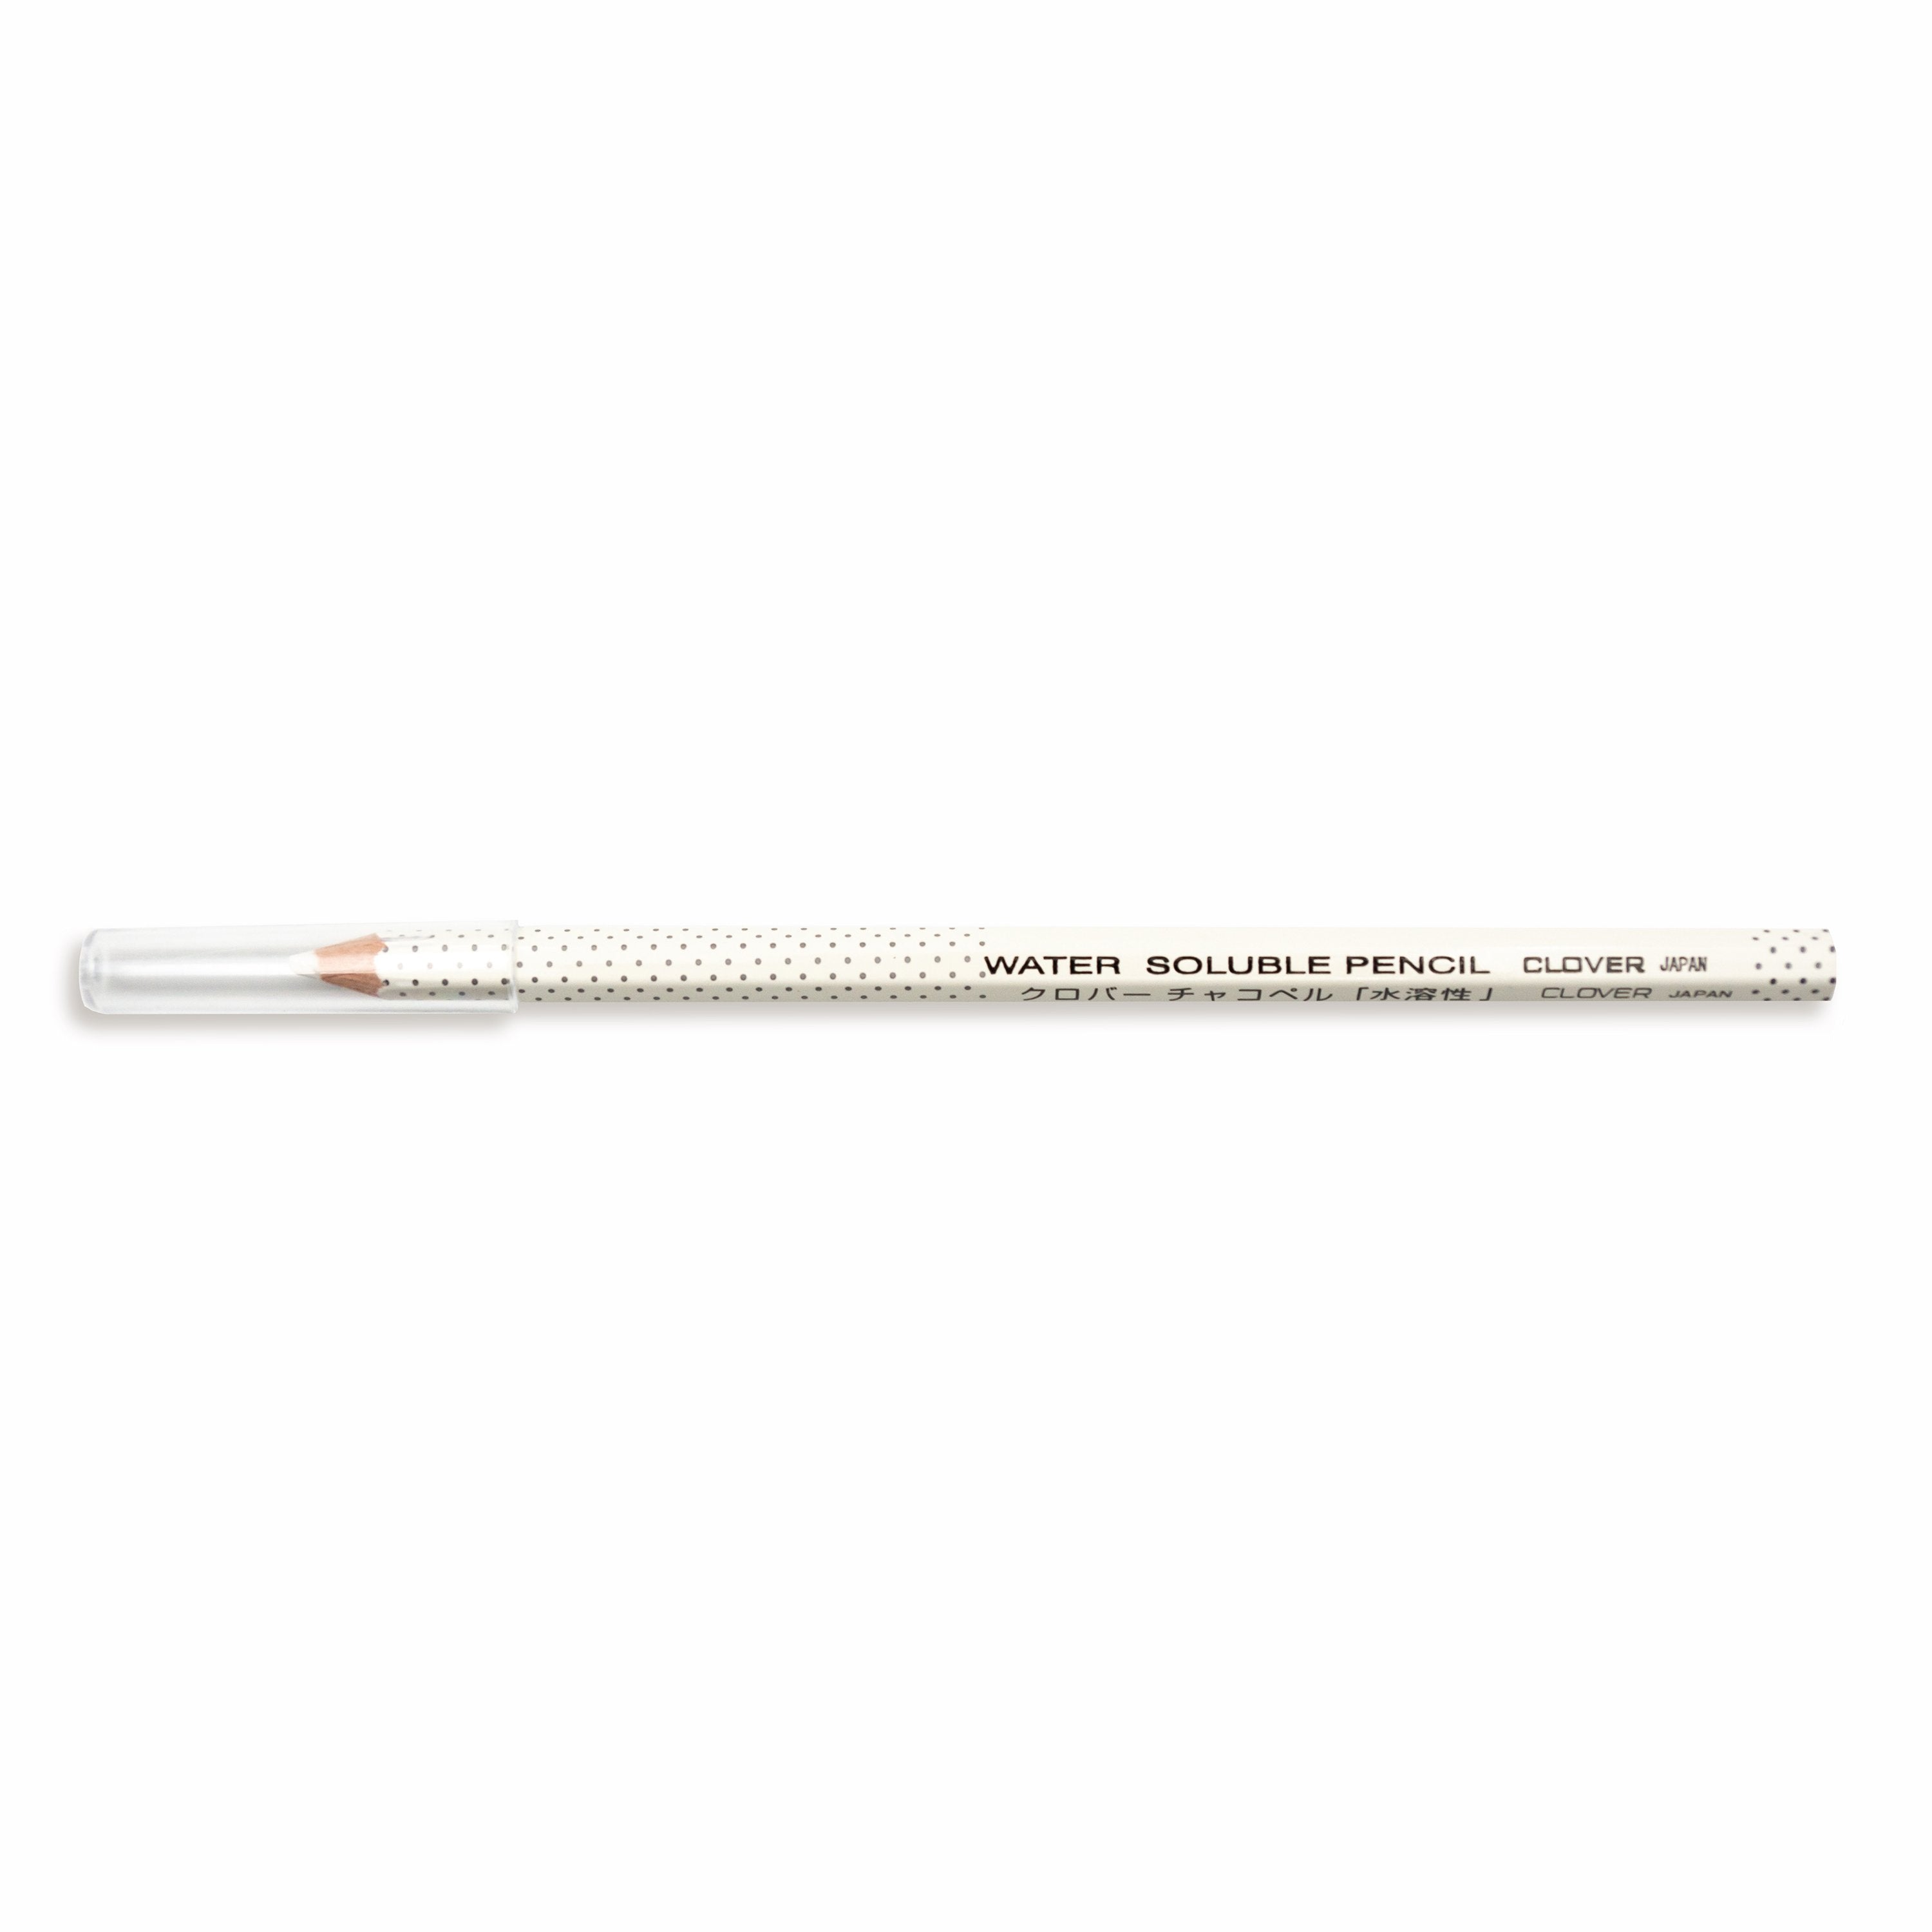 White Sewing Marking Marking Pencils for sale